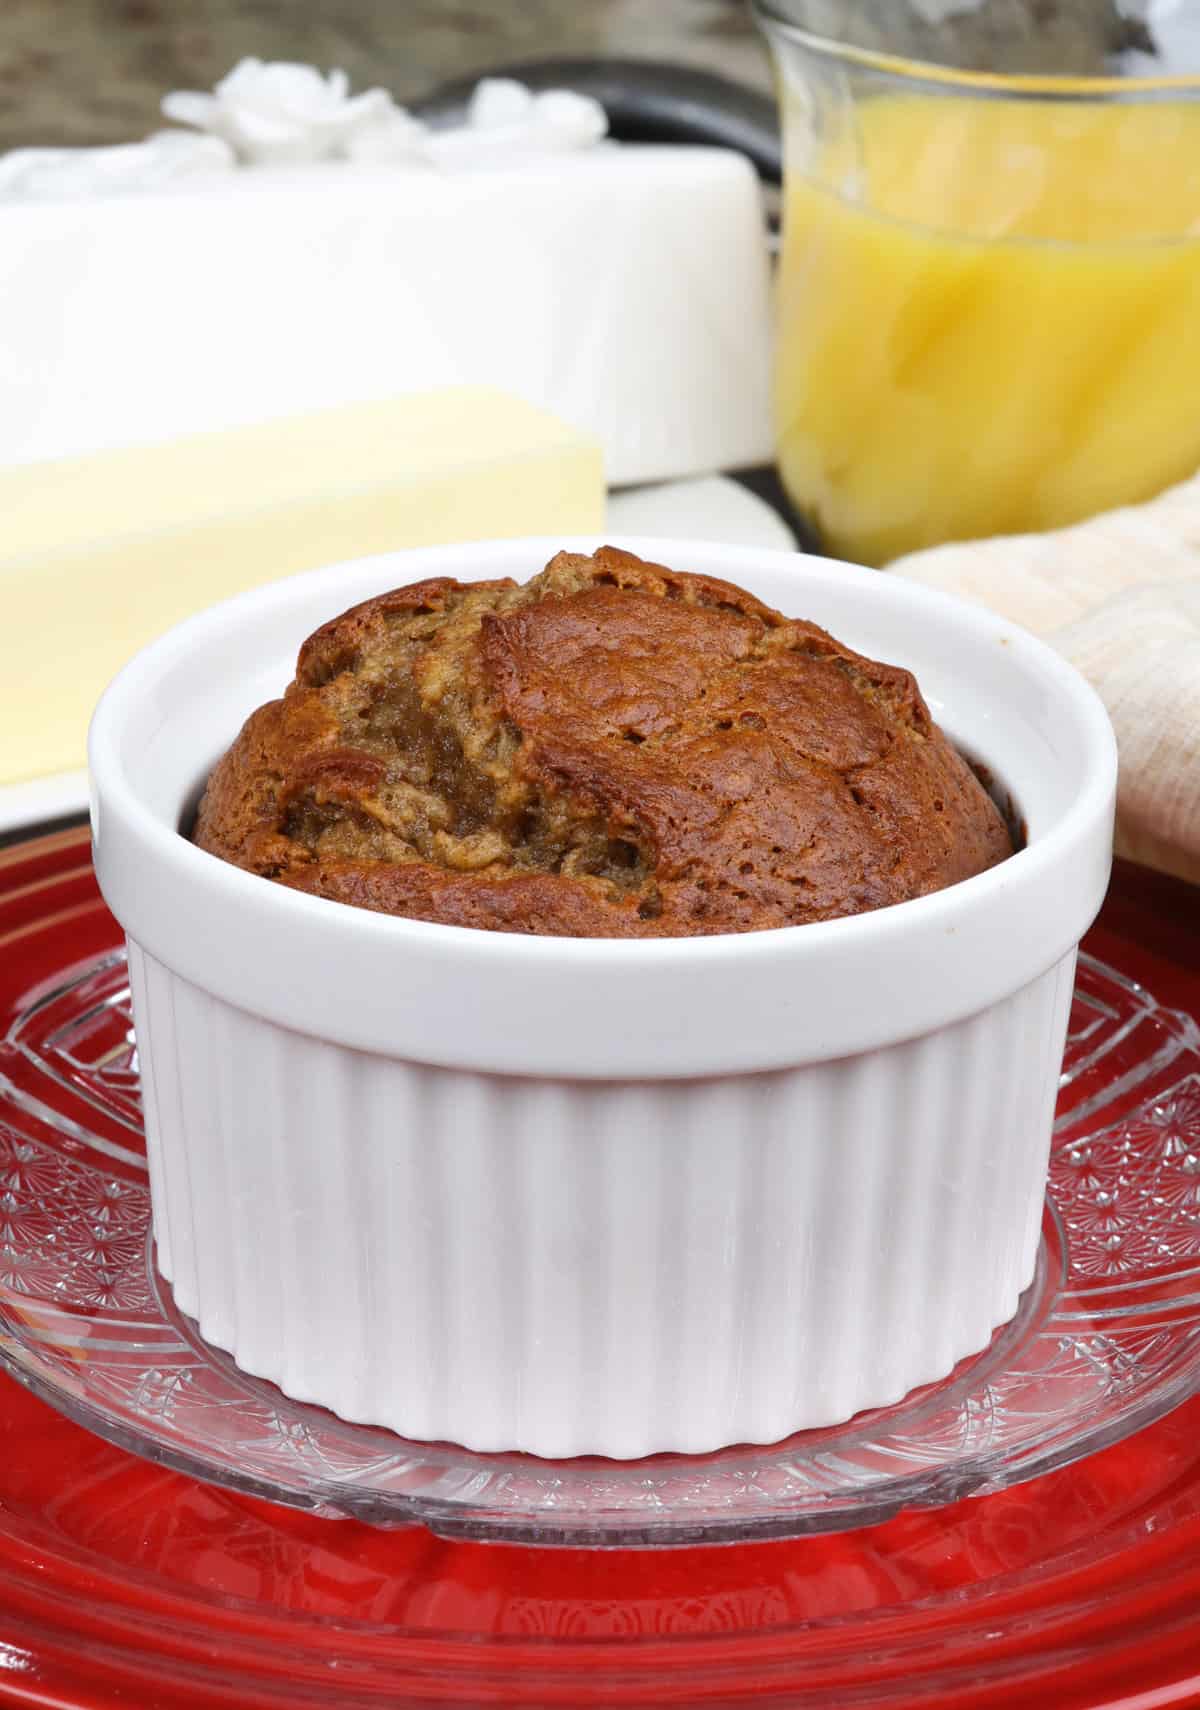 a small banana nut bread baked in a ramekin on a red plate next to a plate of butter and a glass of orange juice